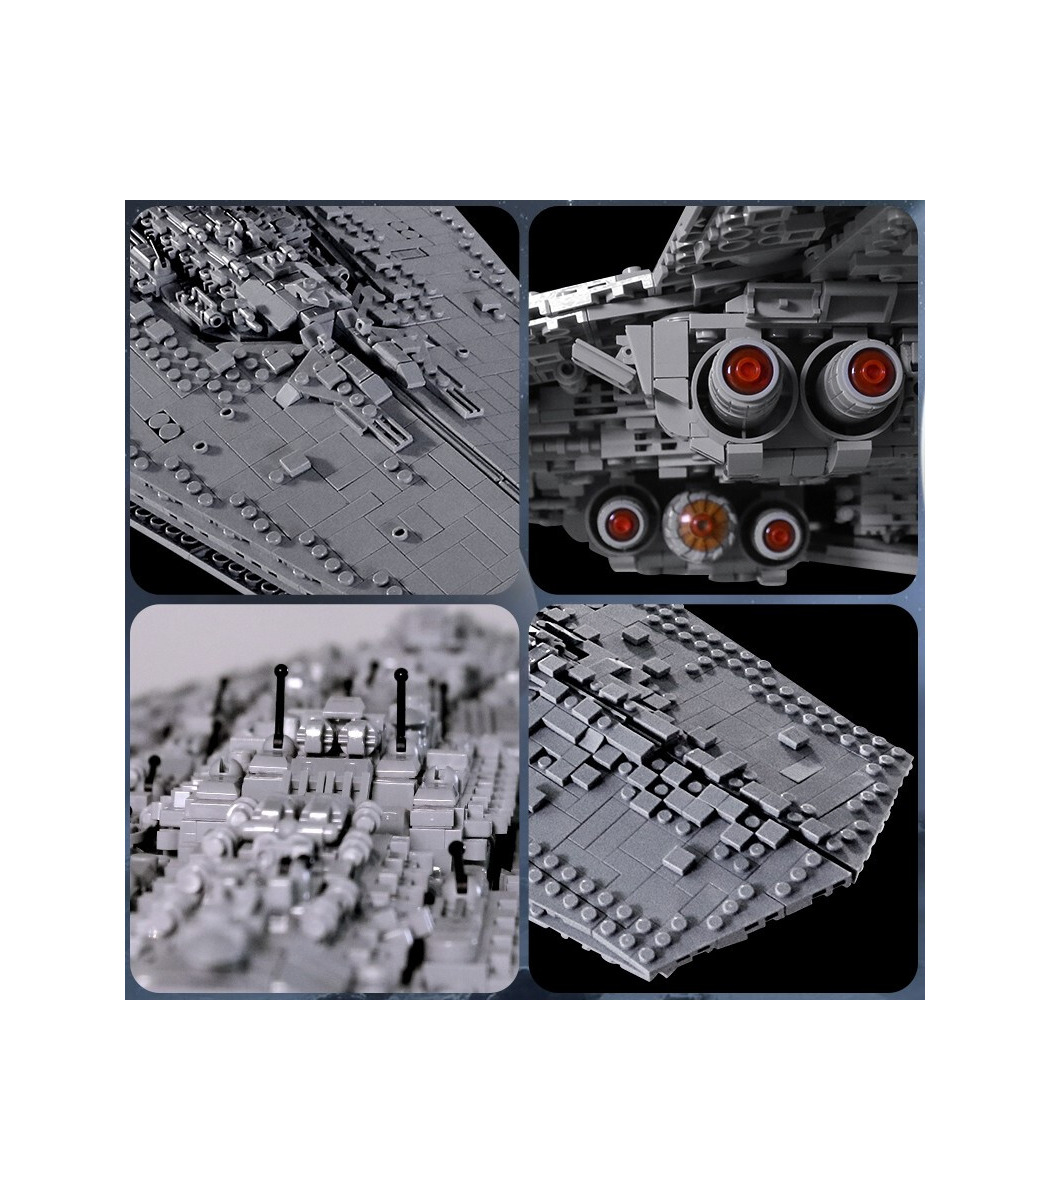  Mould King 13134 Star Plan ：A New Hope Executor Class Star  Dreadnought Ship Super Star Destroyer Building Blocks Toy to Build and  Display Kit for 8-14 Boys Collection As Adult Kid